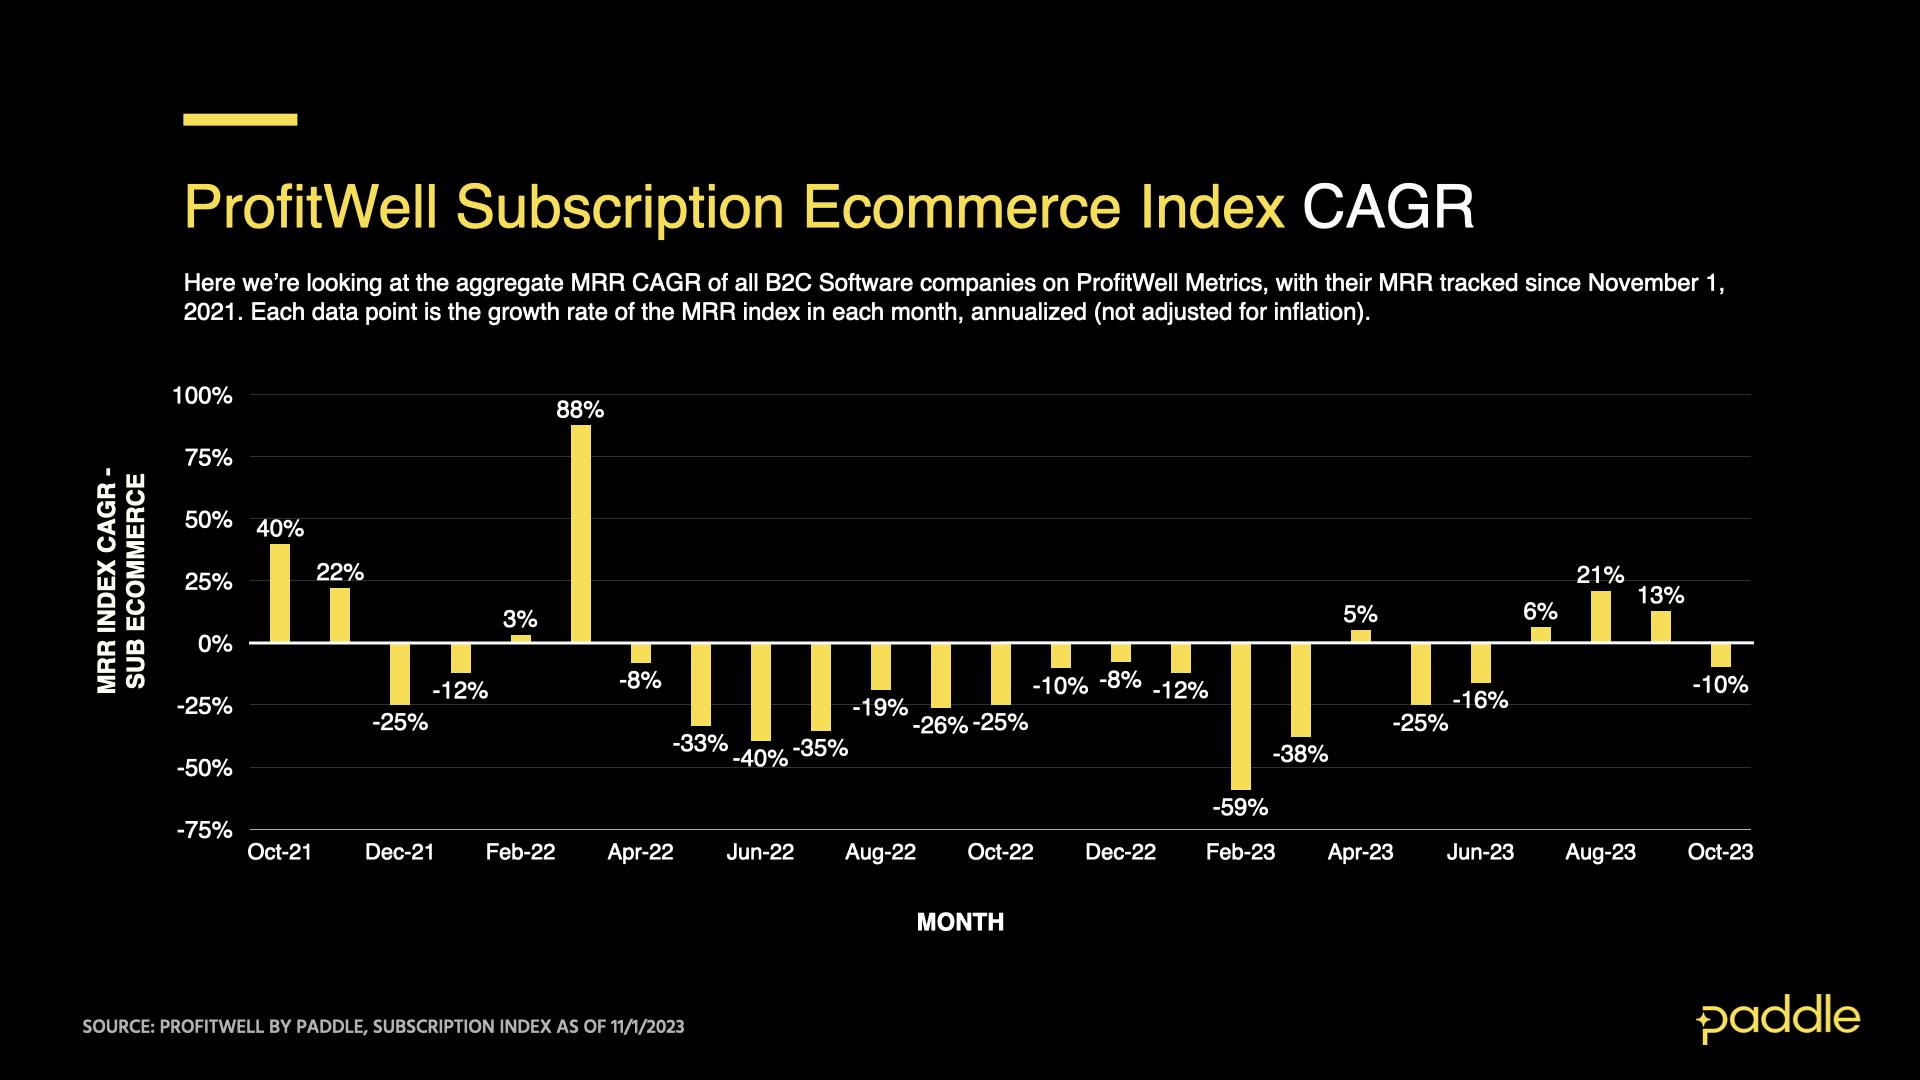 ProfitWell Subscription eCommerce Index as of November 1, 2023 - Compound Annual Growth Rate in MRR, Quarterly